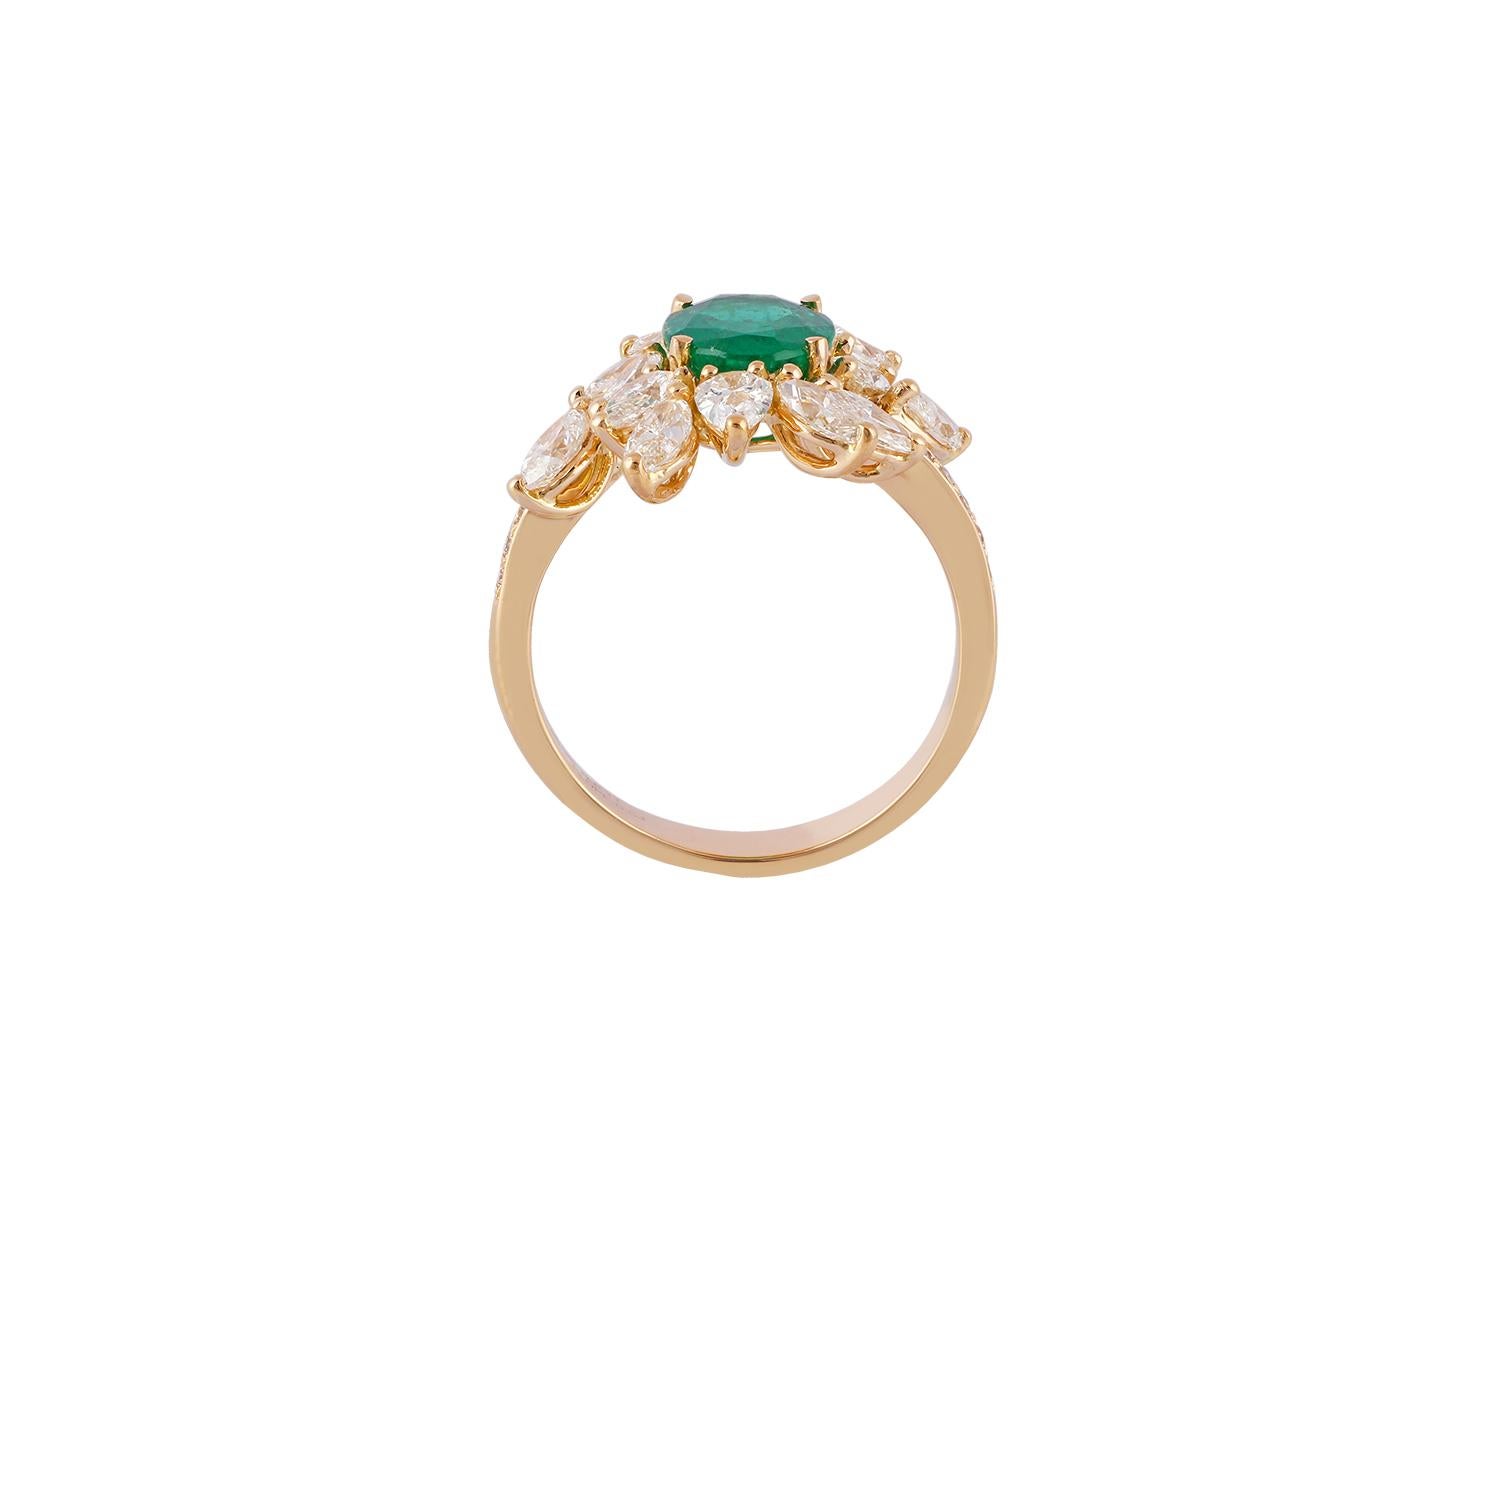 Contemporary 1.48 Carat Clear Zambian Emerald & Diamond Cluster Ring in 18K Yellow Gold For Sale